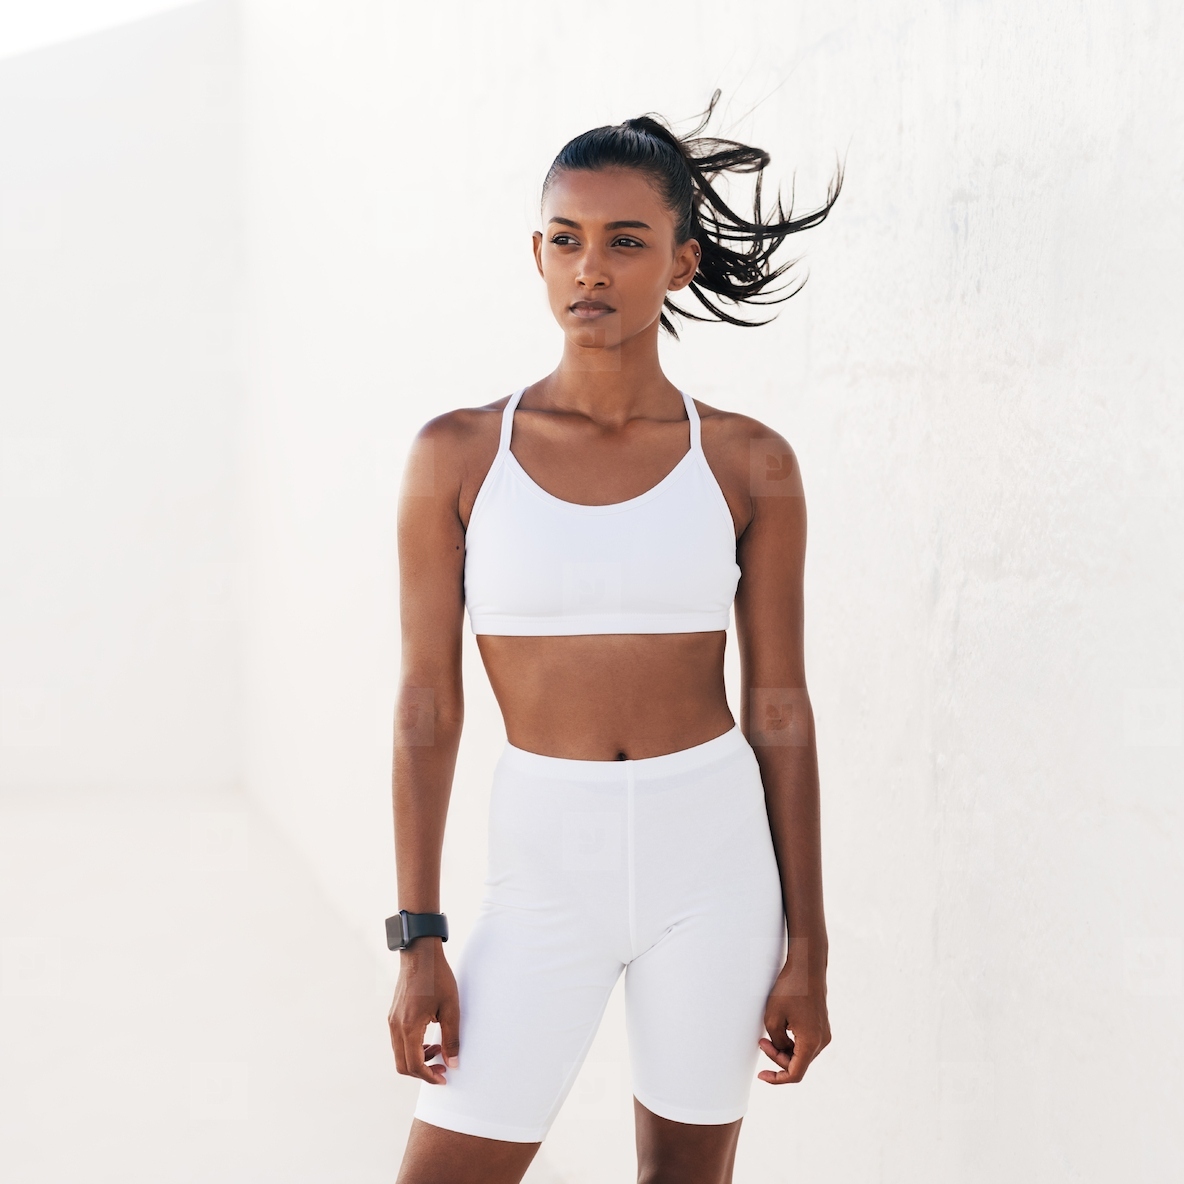 Confident sportswoman in white fitness clothes standing outdoors and looking away